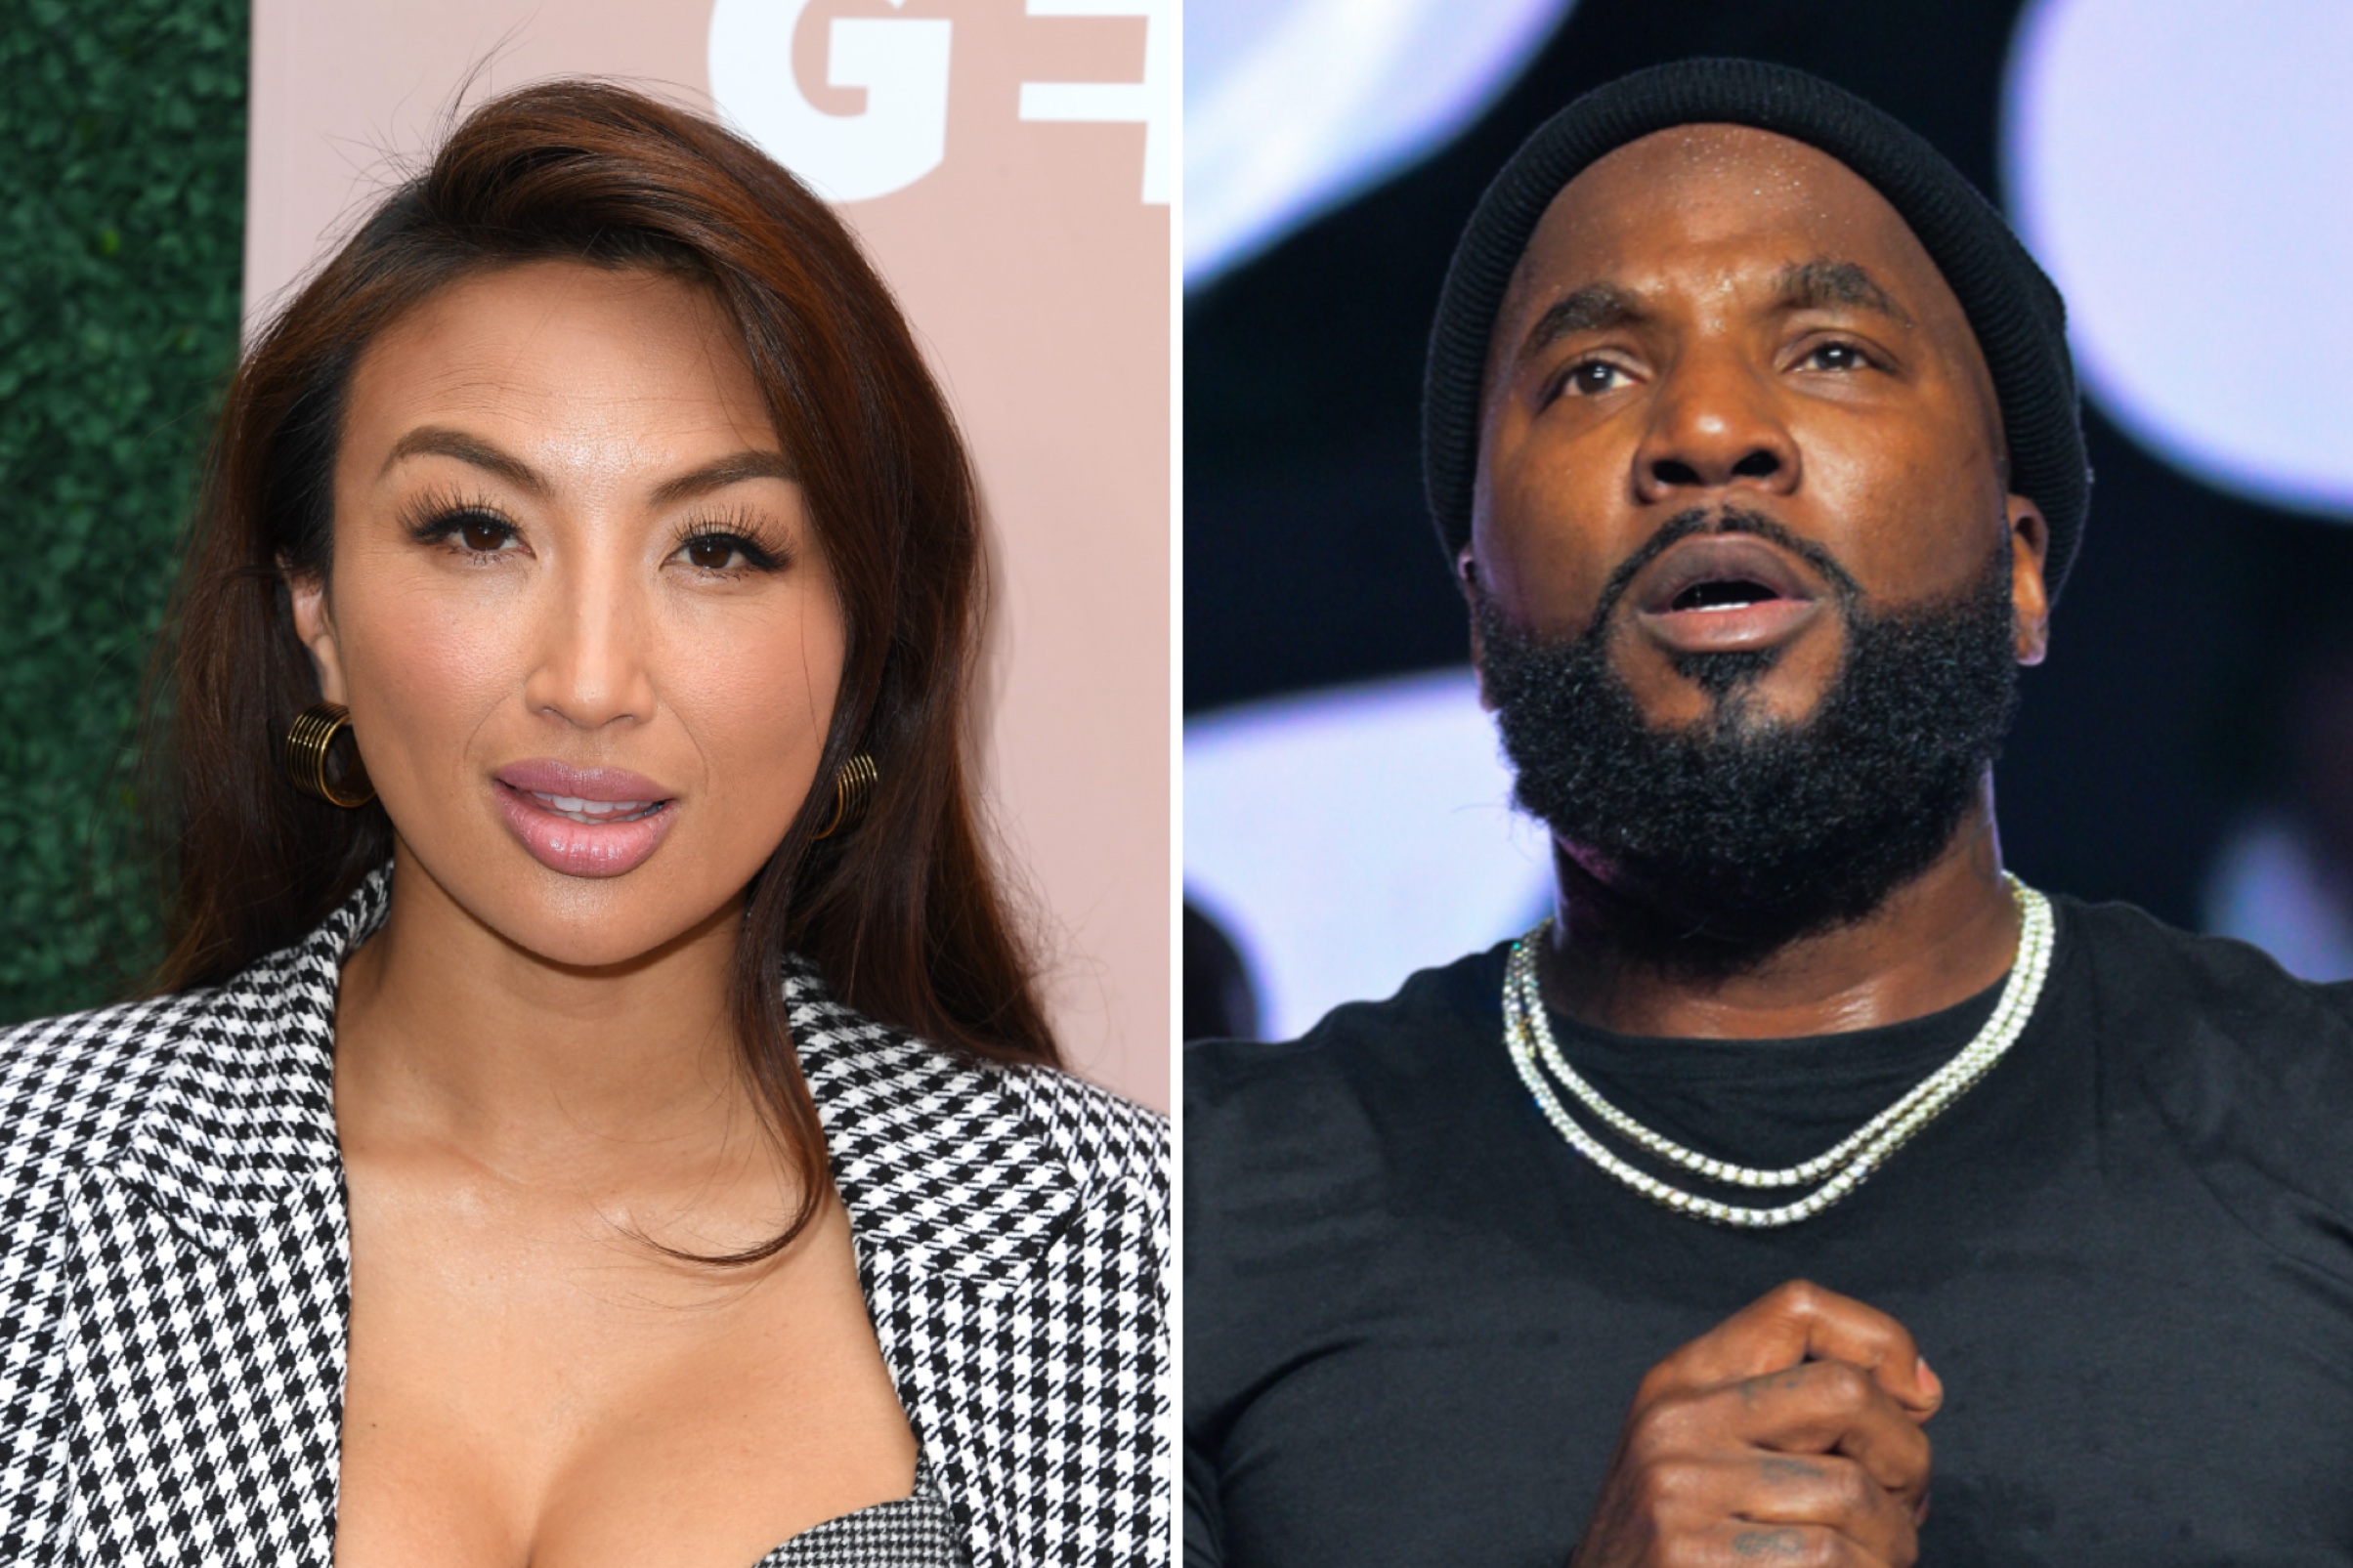 Jeannie Mai Claims Jeezy Lacks A 'Properly Trained Caregiver' For Baby ...